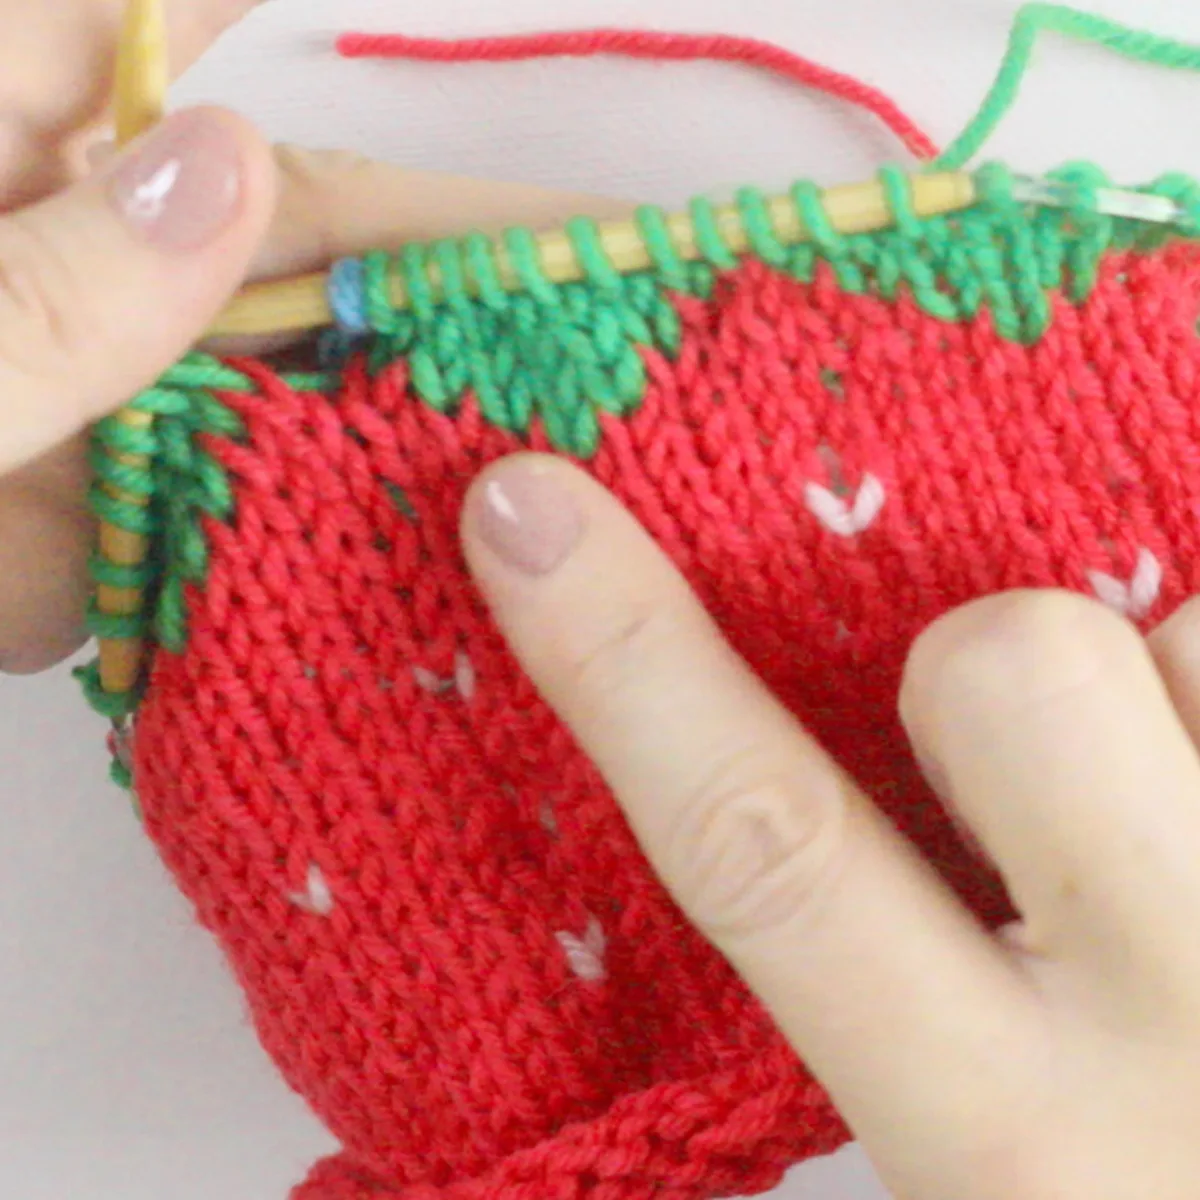 Knitting process of the strawberry baby hat with hands pointing out the topper in green yarn color.